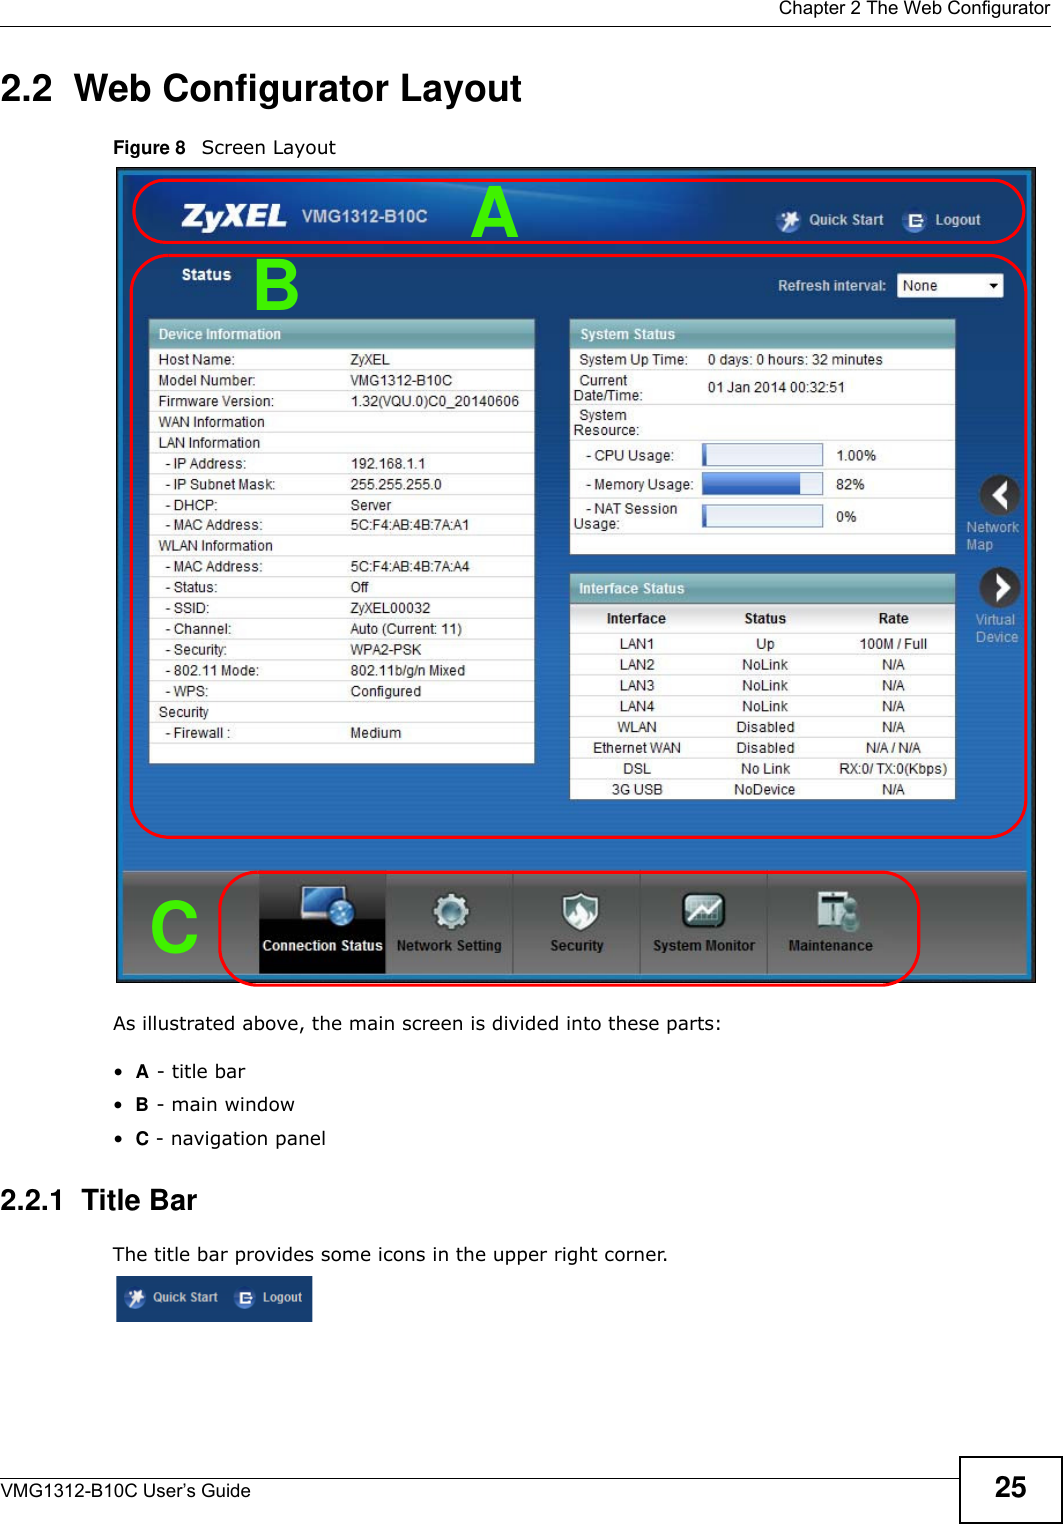  Chapter 2 The Web ConfiguratorVMG1312-B10C User’s Guide 252.2  Web Configurator LayoutFigure 8   Screen LayoutAs illustrated above, the main screen is divided into these parts:•A - title bar•B - main window •C - navigation panel2.2.1  Title BarThe title bar provides some icons in the upper right corner.BCA